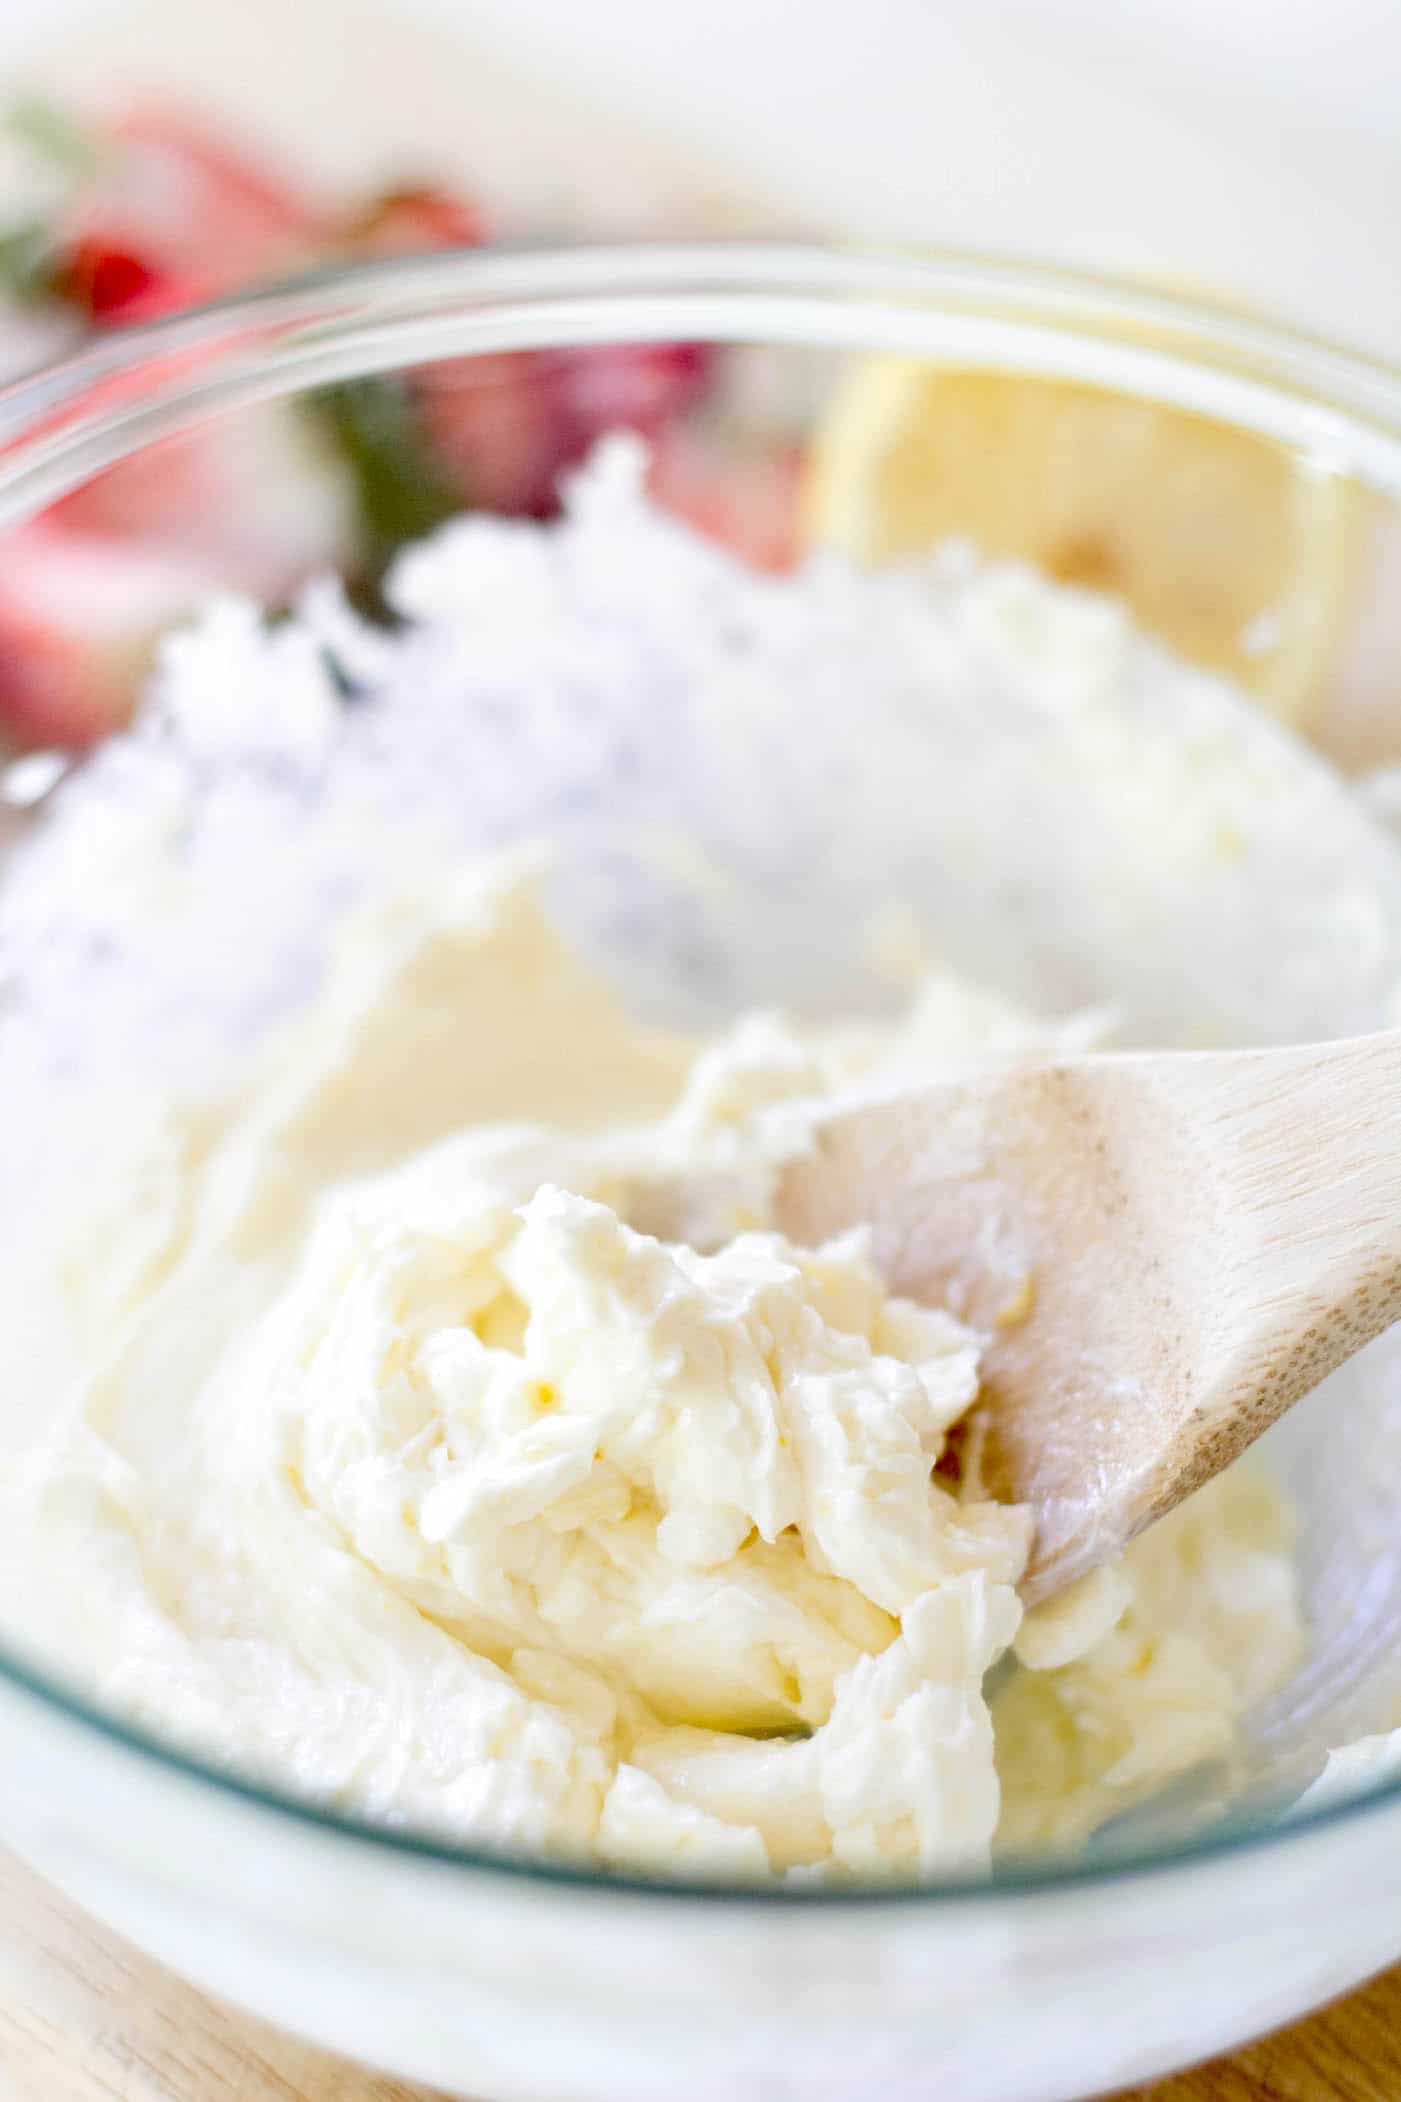 Mixing together cream cheese, sugar, lemon juice, zest, and vanilla in a bowl